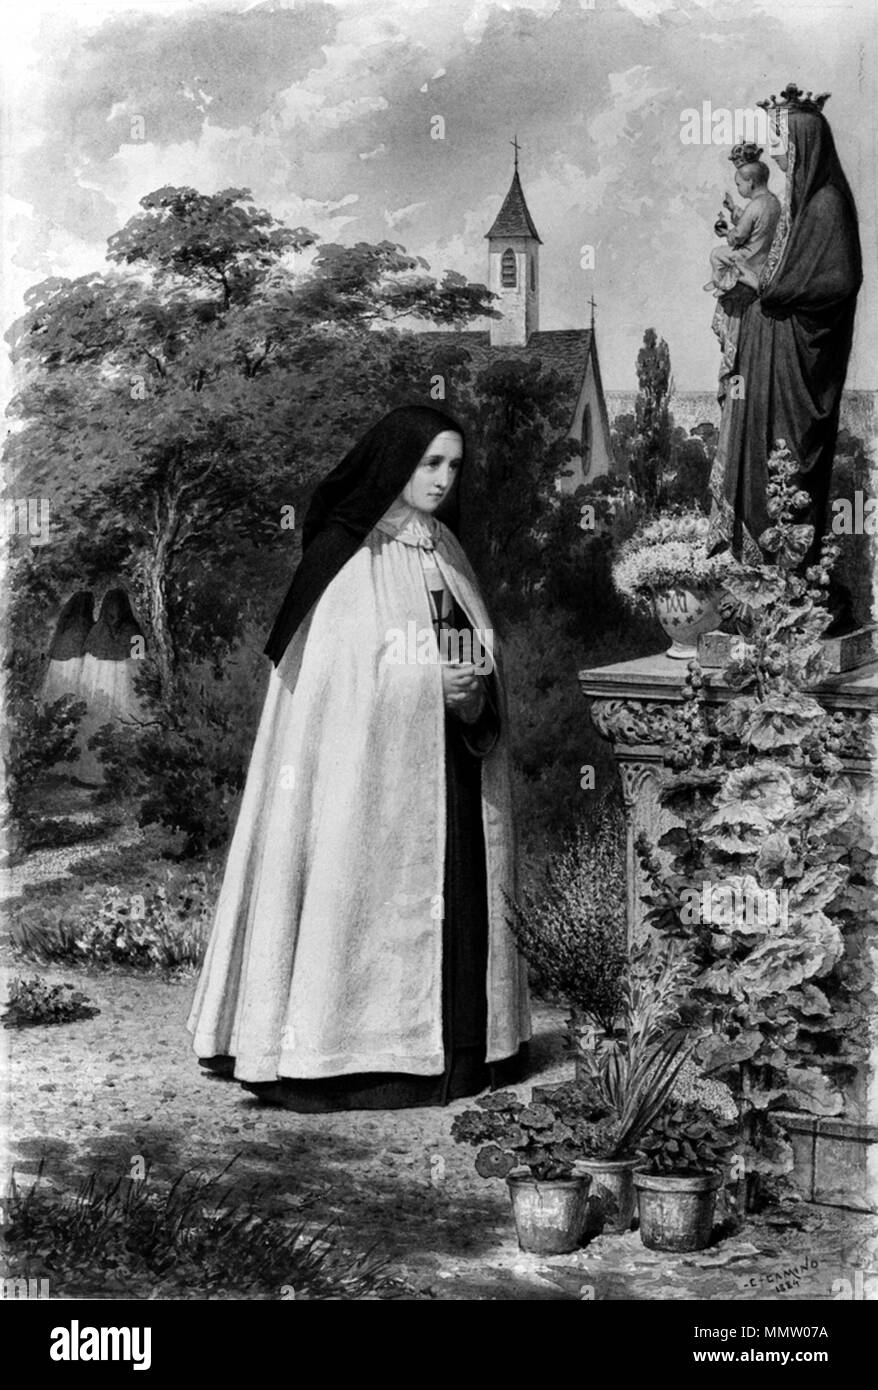 37.1306 Charles Camino (French, 1824-1888). 'Nun in Prayer,' 1884. watercolor with graphite underdrawing on cream, moderatly thick, slightly textured wove paper. Walters Art Museum (37.1306): Acquired by William T. Walters. Charles Camino - Nun in Prayer - Walters 371306 Stock Photo